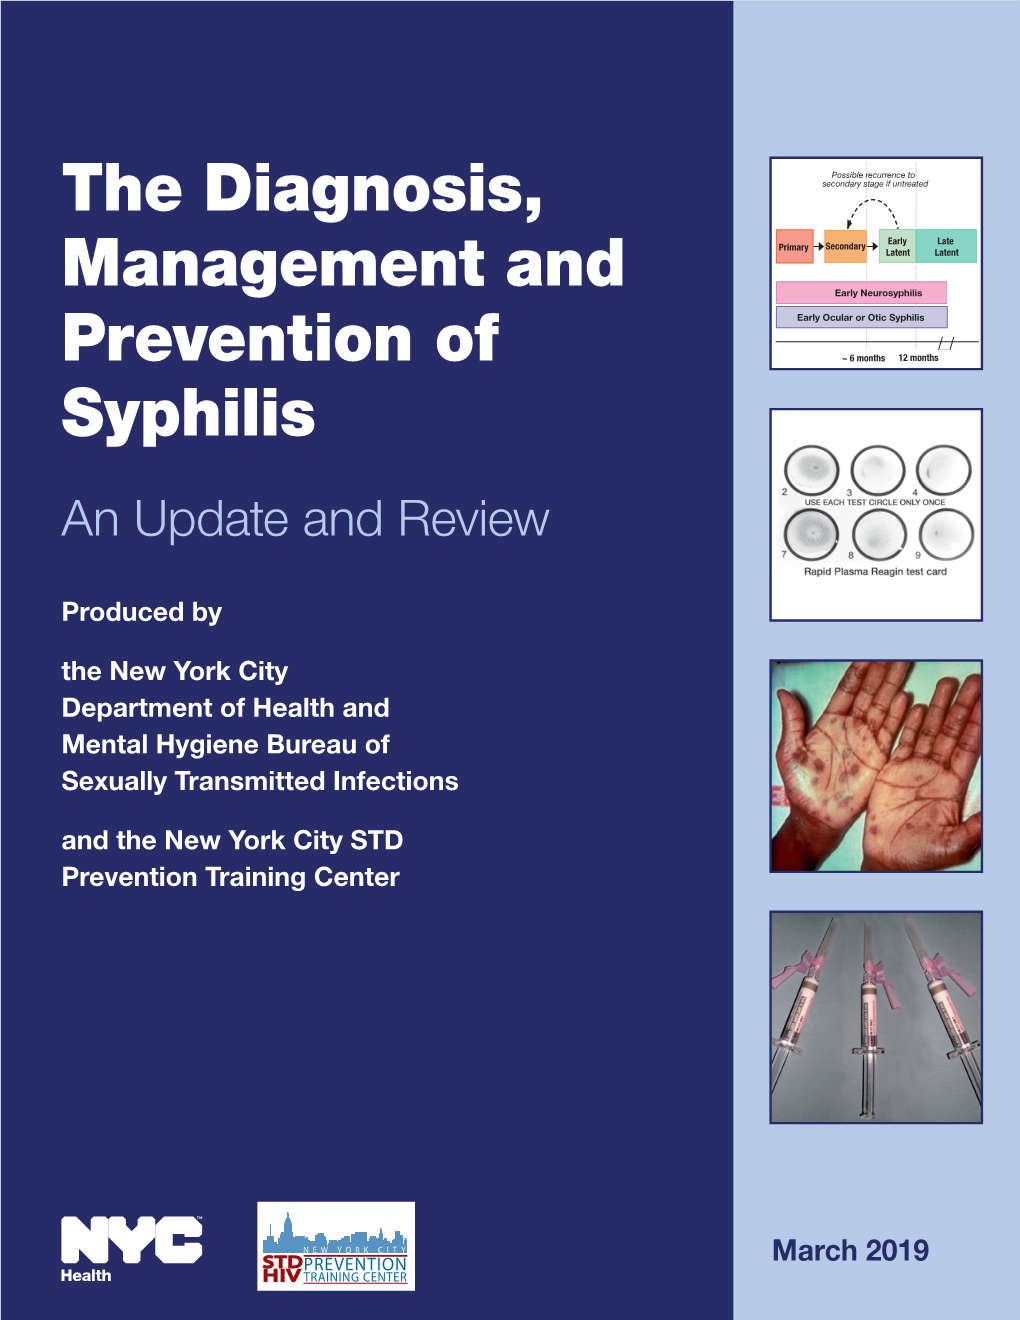 The Diagnosis, Management and Prevention of Syphilis